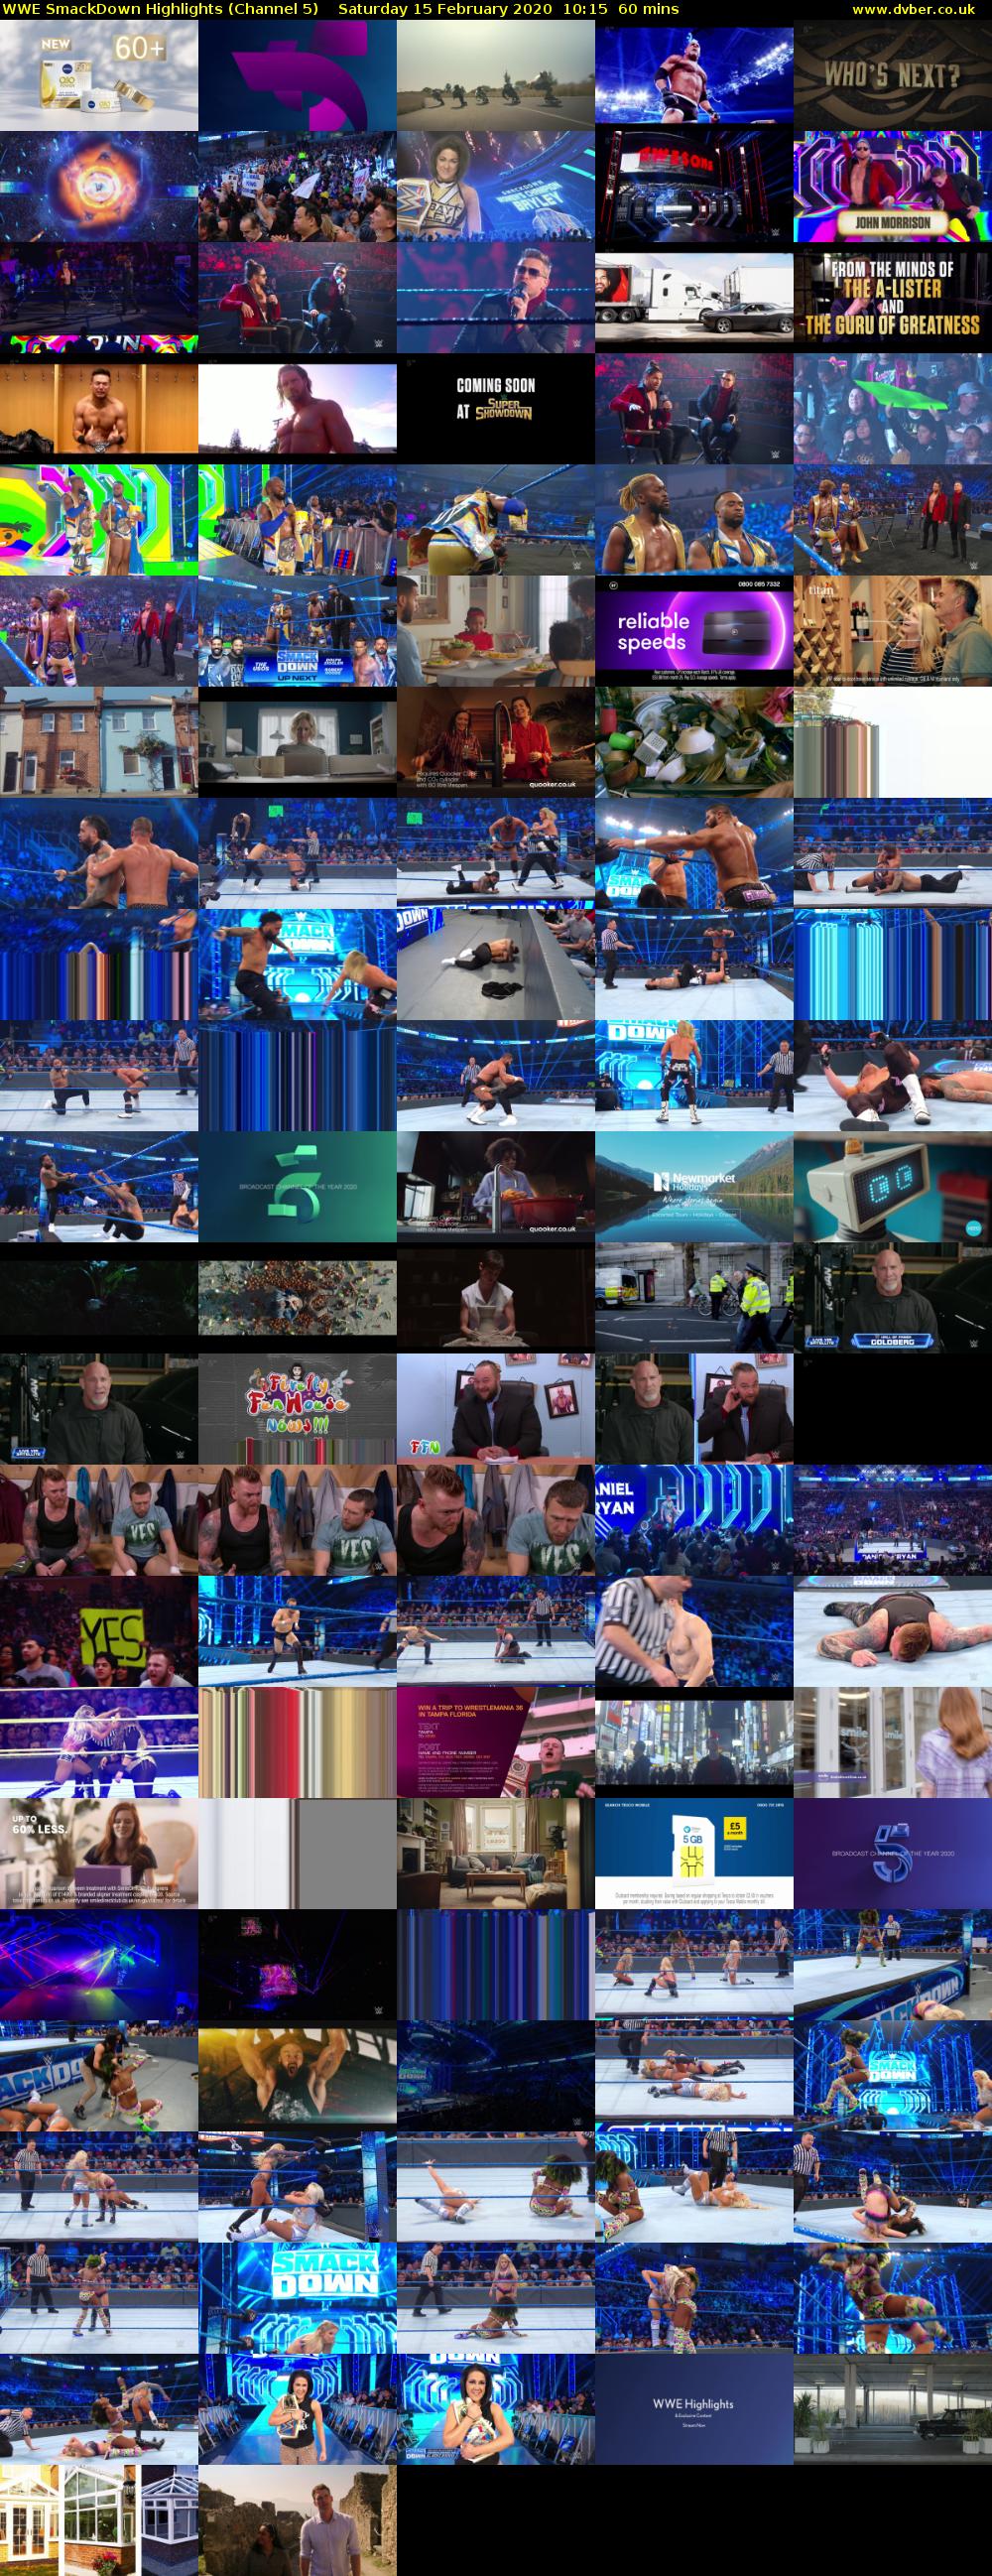 WWE SmackDown Highlights (Channel 5) Saturday 15 February 2020 10:15 - 11:15